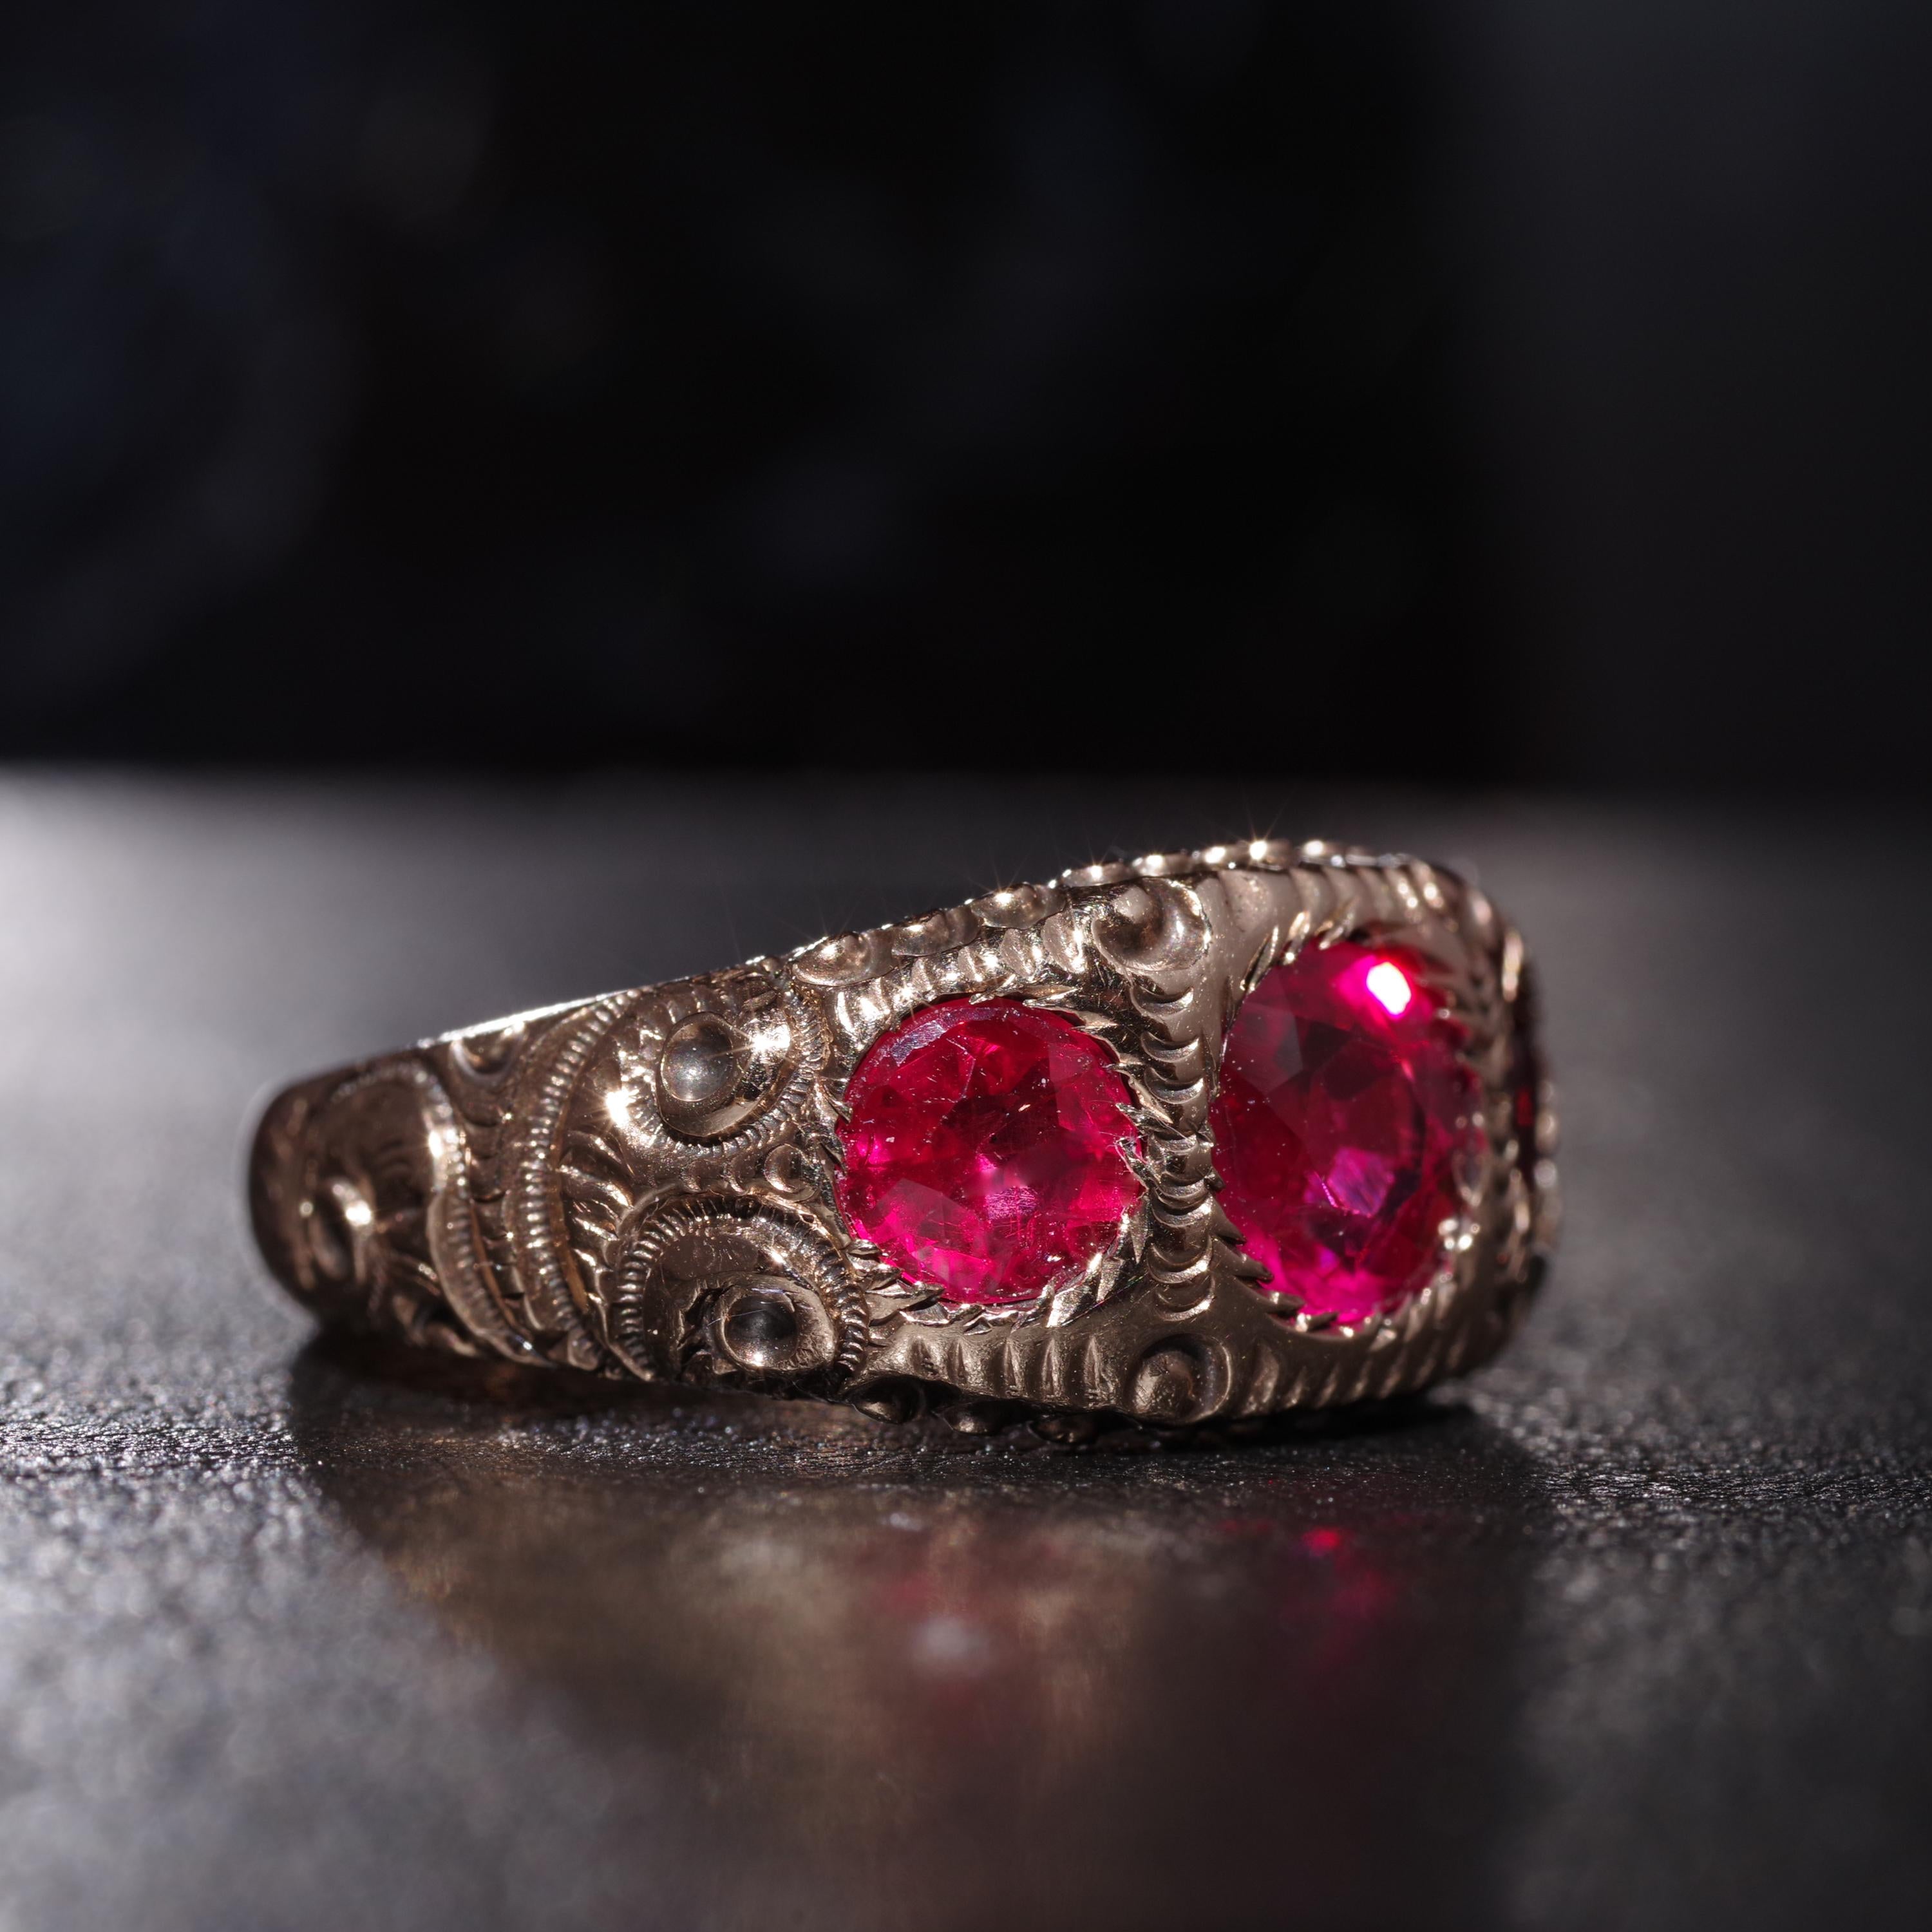 Dating to approximately 1890, this American-made men's ring features three gemmy, bright and vivid rubellite tourmaline stones set within a deeply carved 10K yellow gold band. Two round faceted rubellite gems weighing approximately half-a-carat each